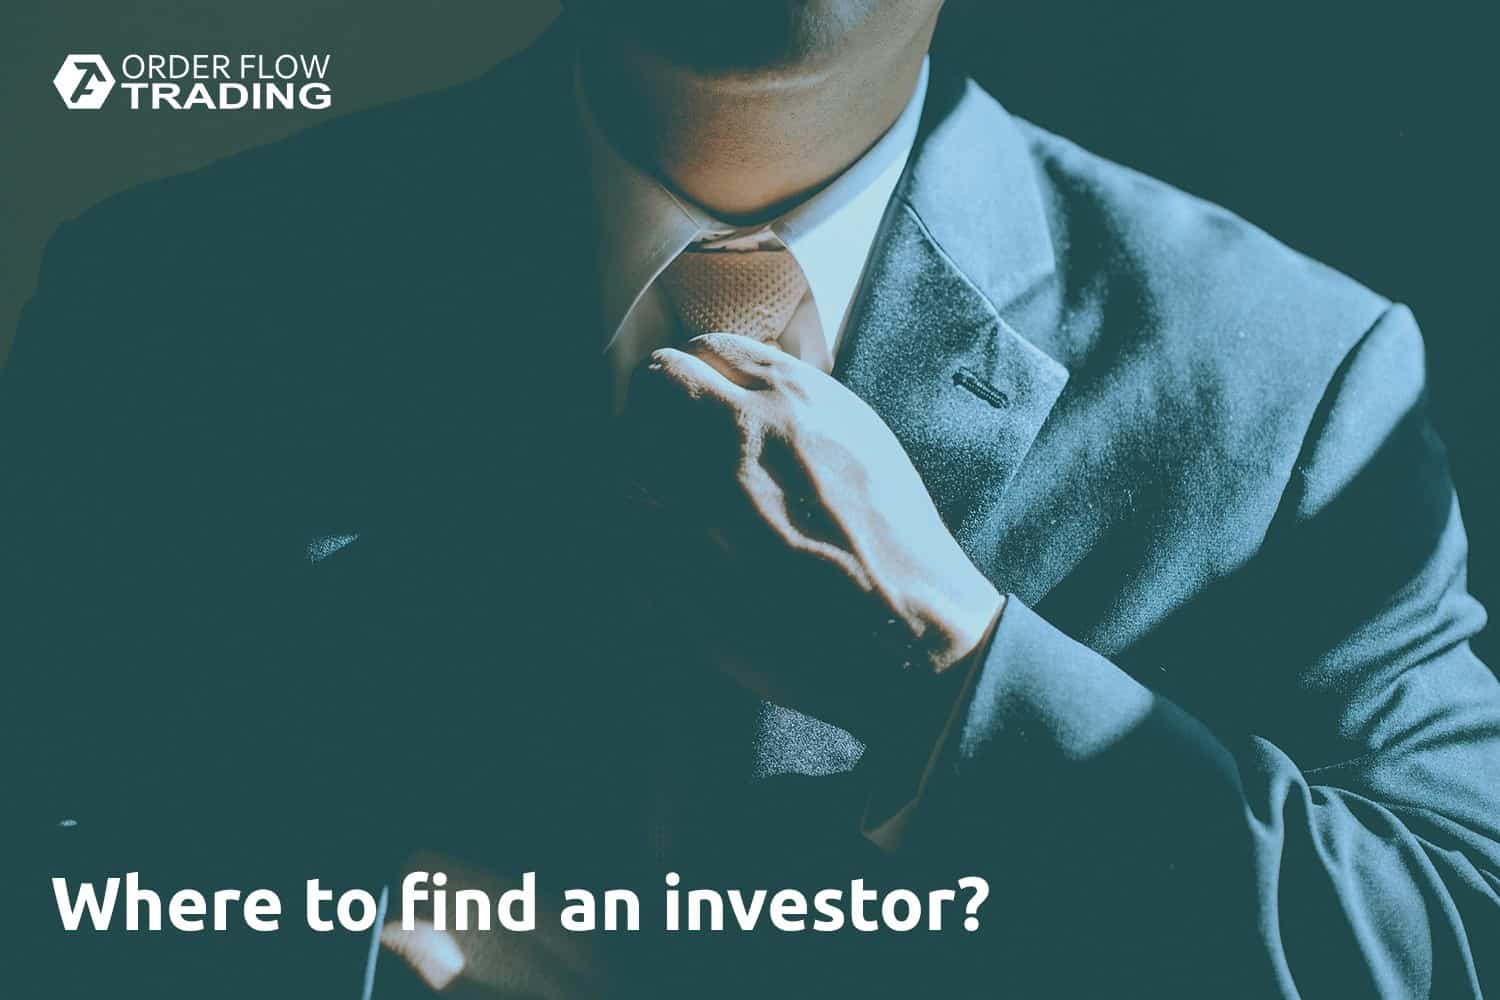 Do you want to find investors?